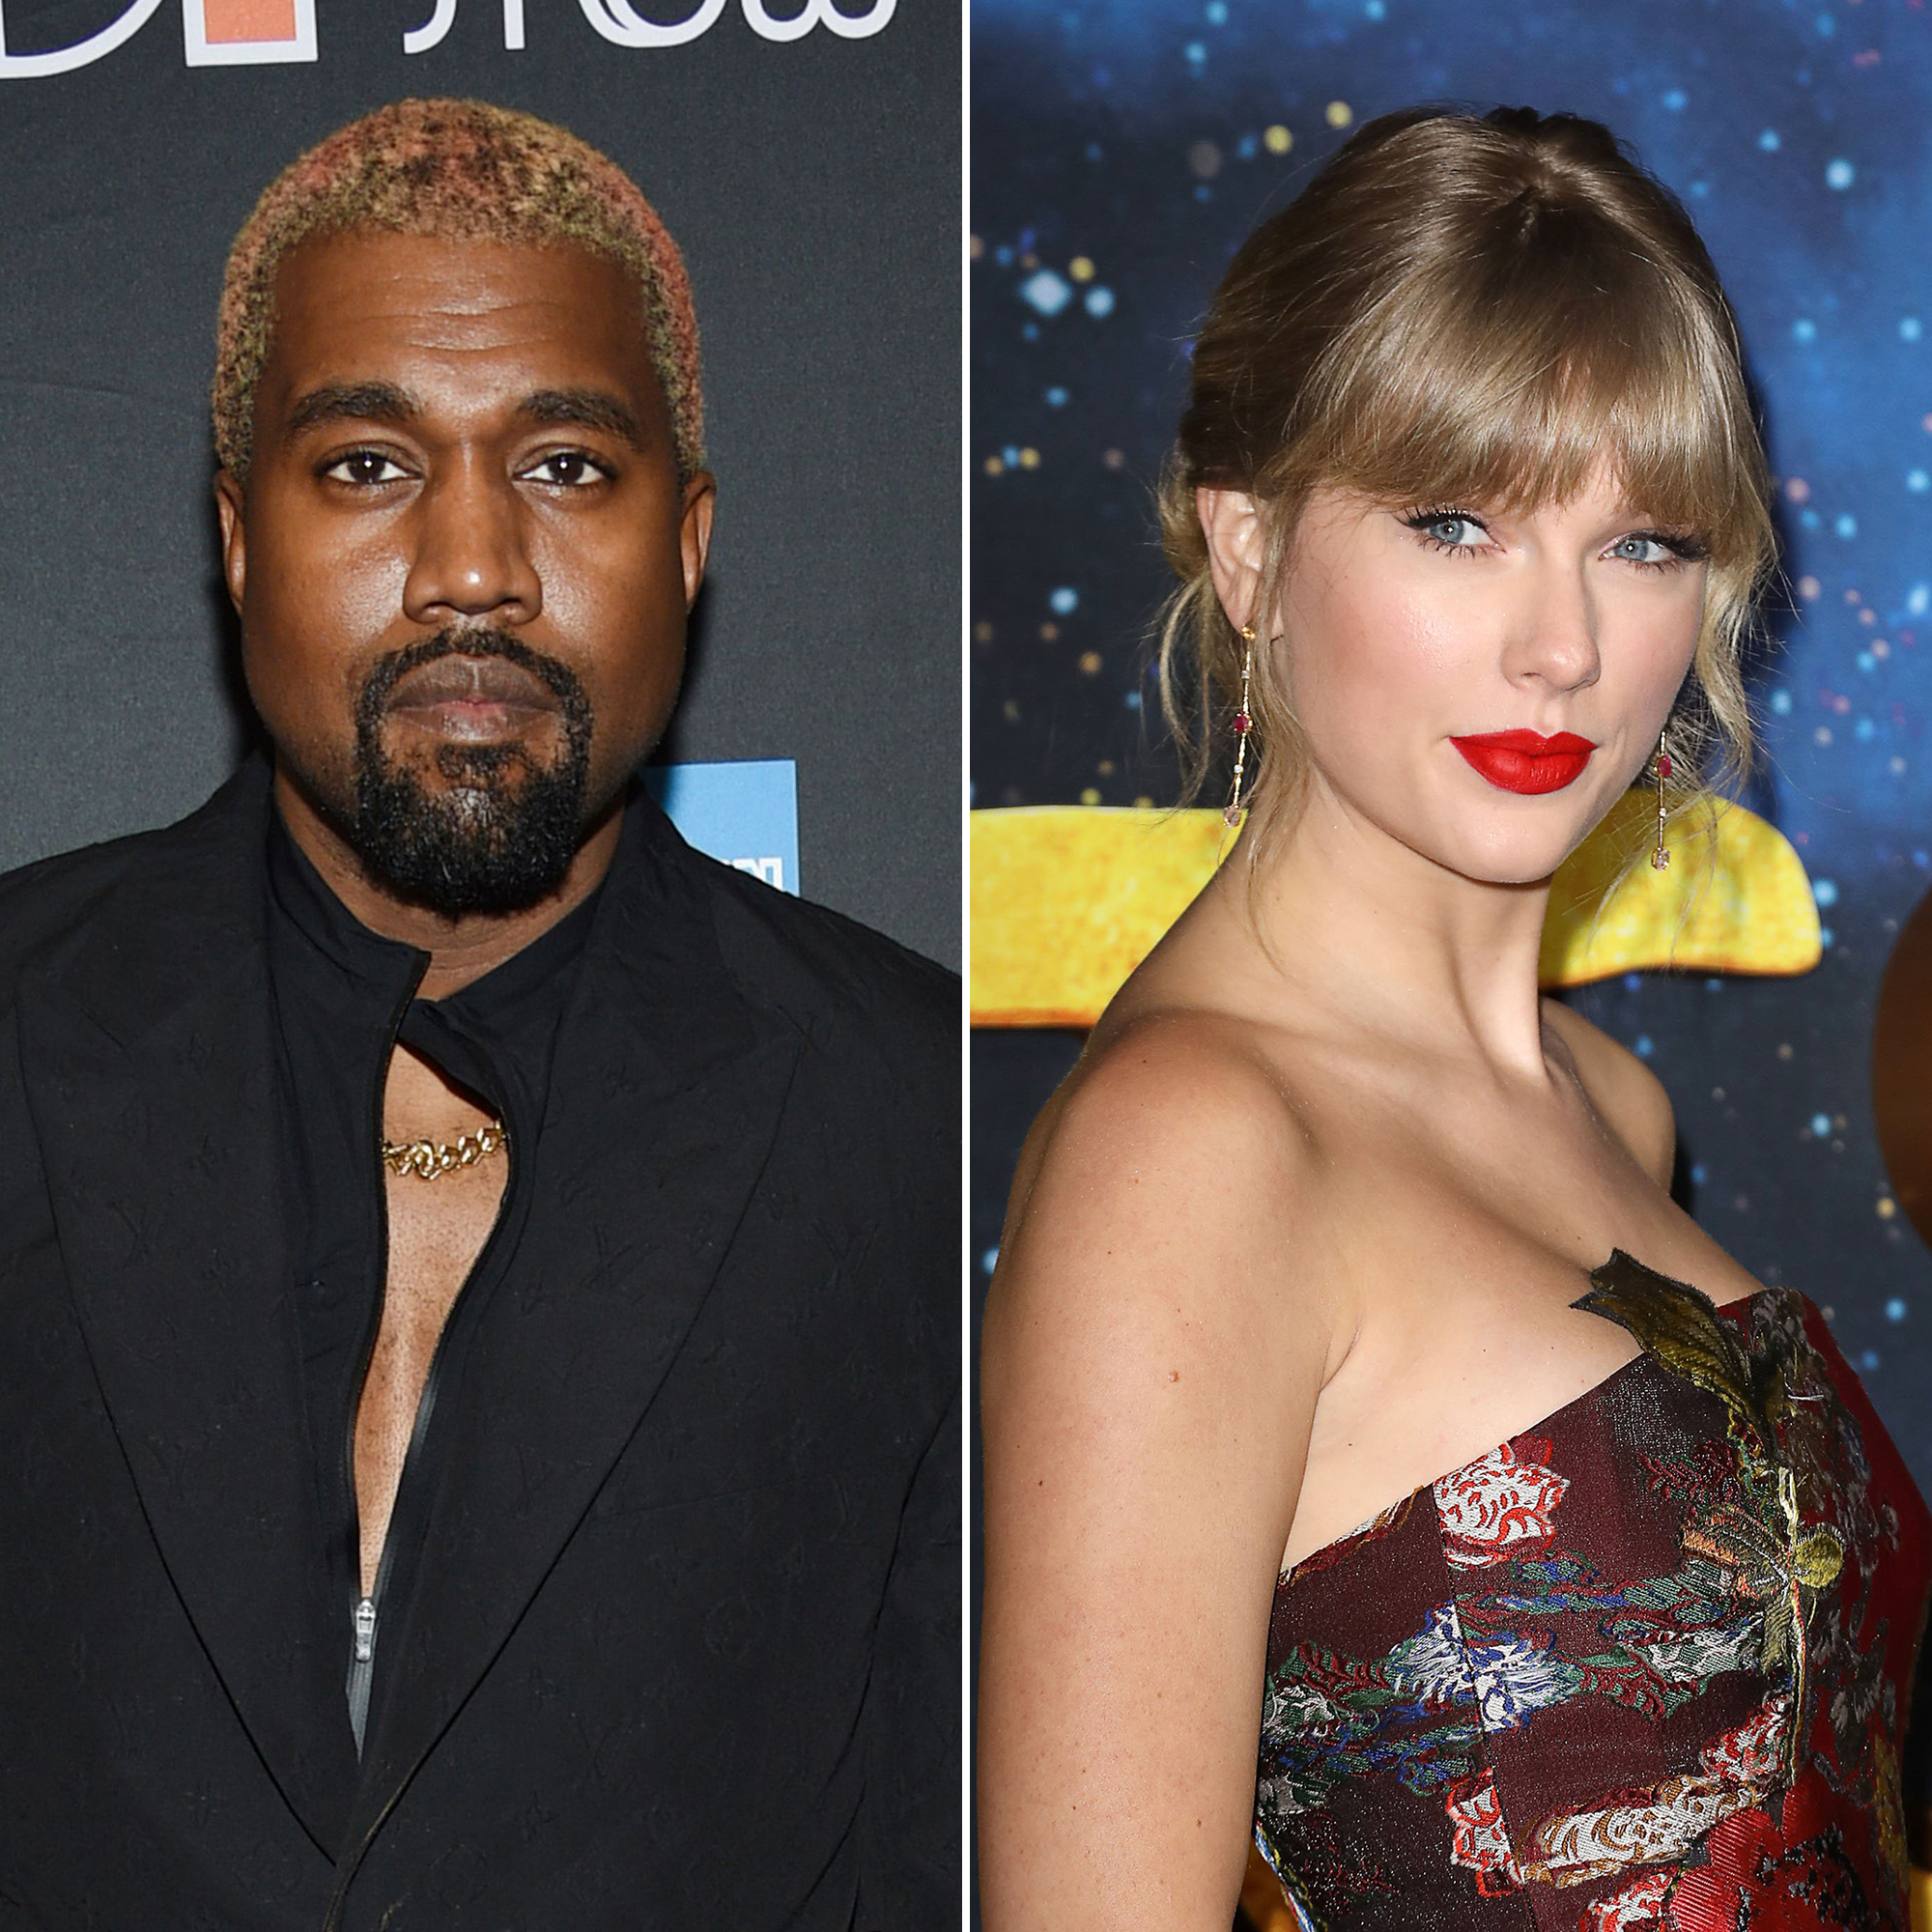 Taylor Swift Porn Public - Kanye West Vows to Get Taylor Swift Her Music Back Amid Twitter Rant